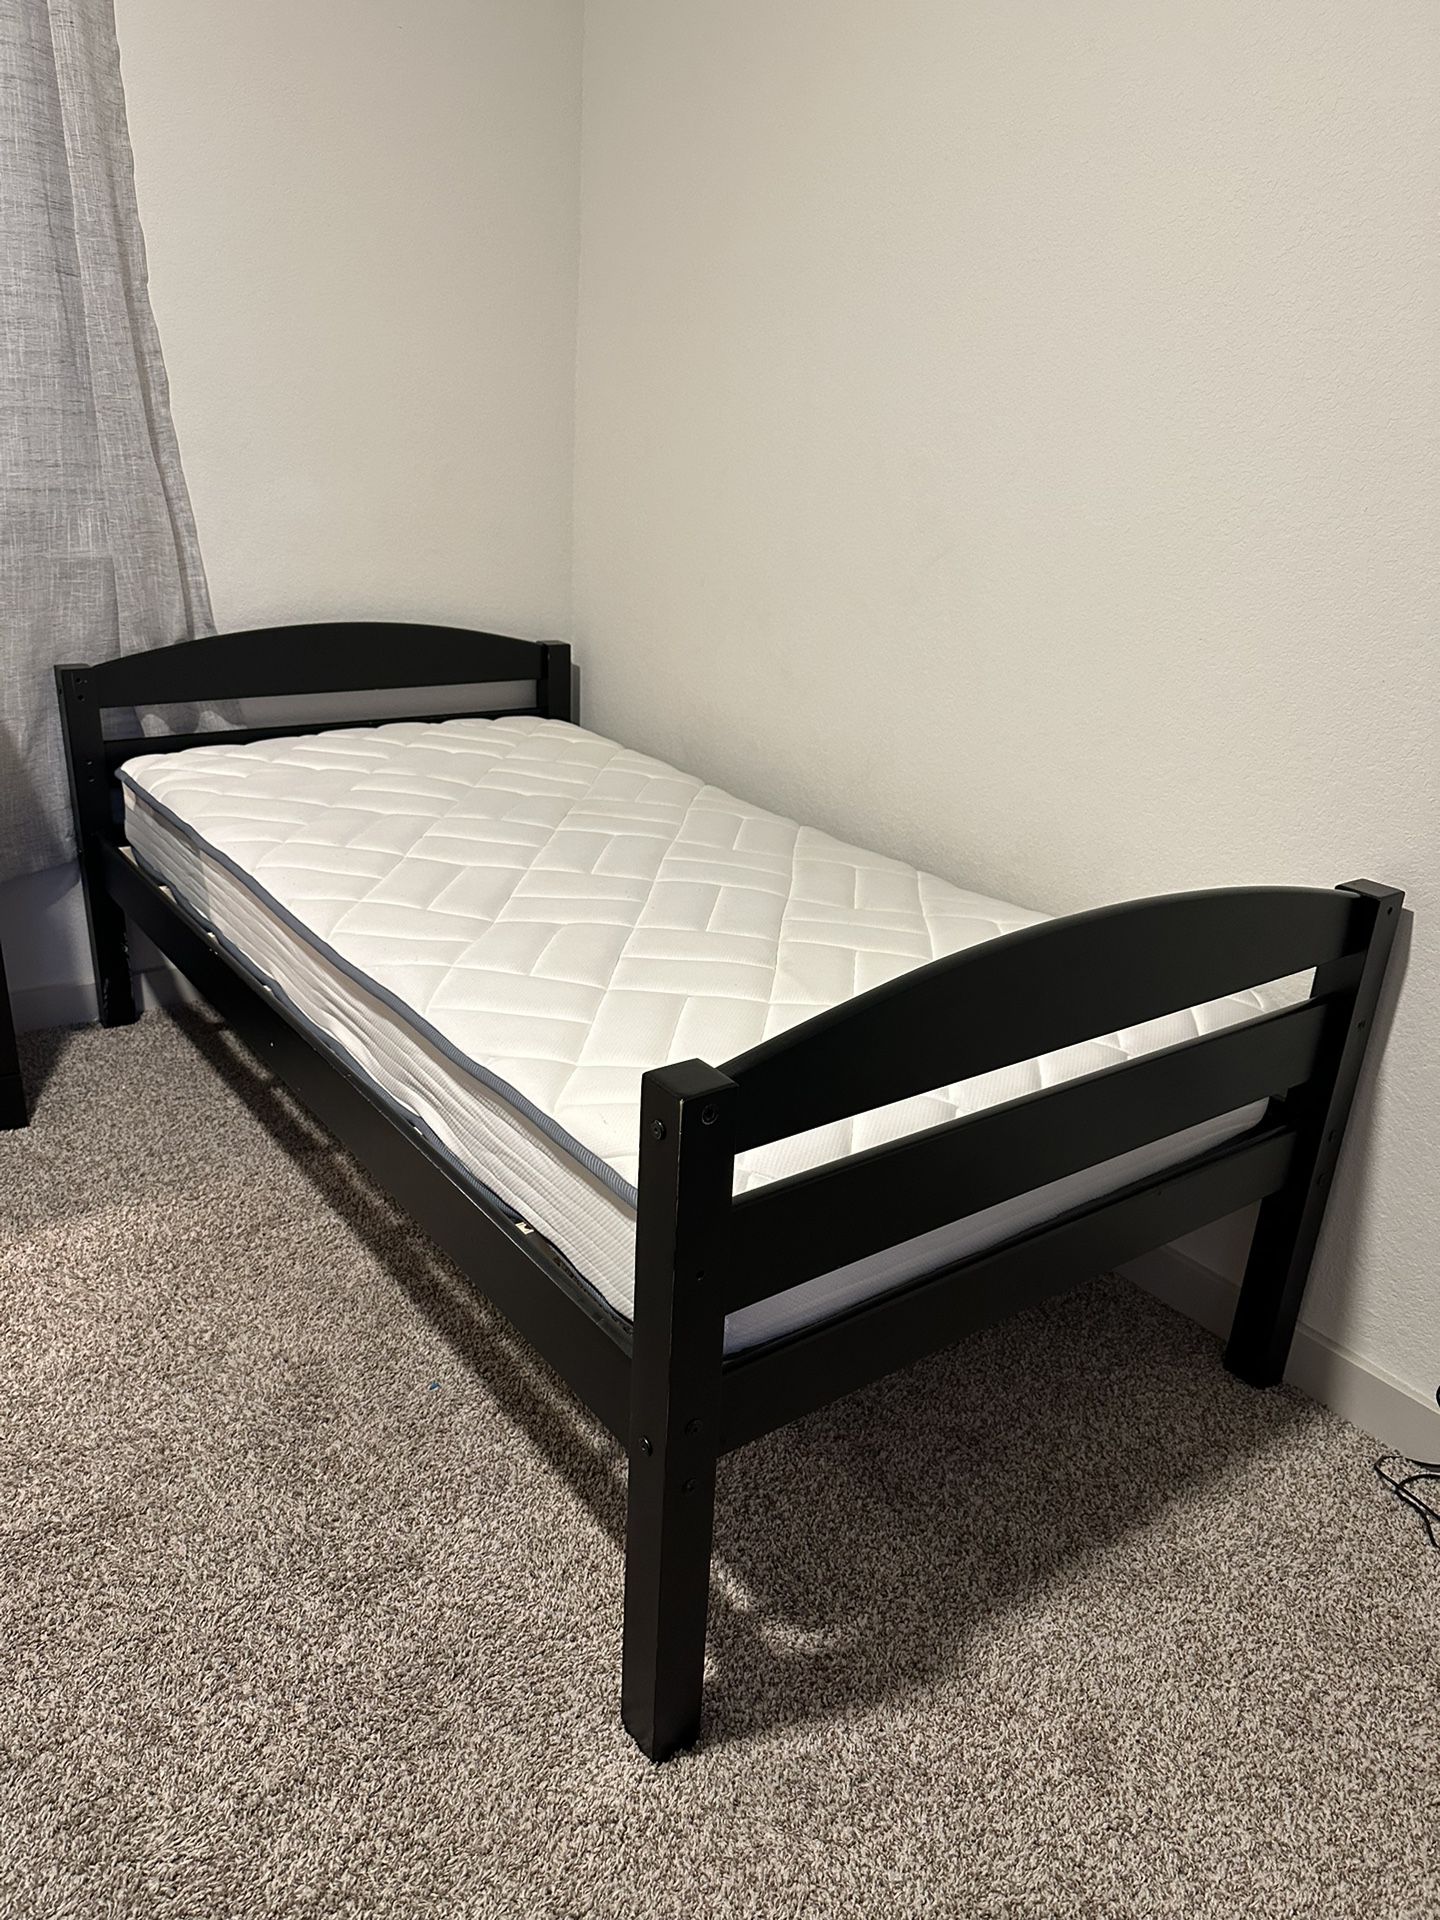 Twin bed / Bunk bed 